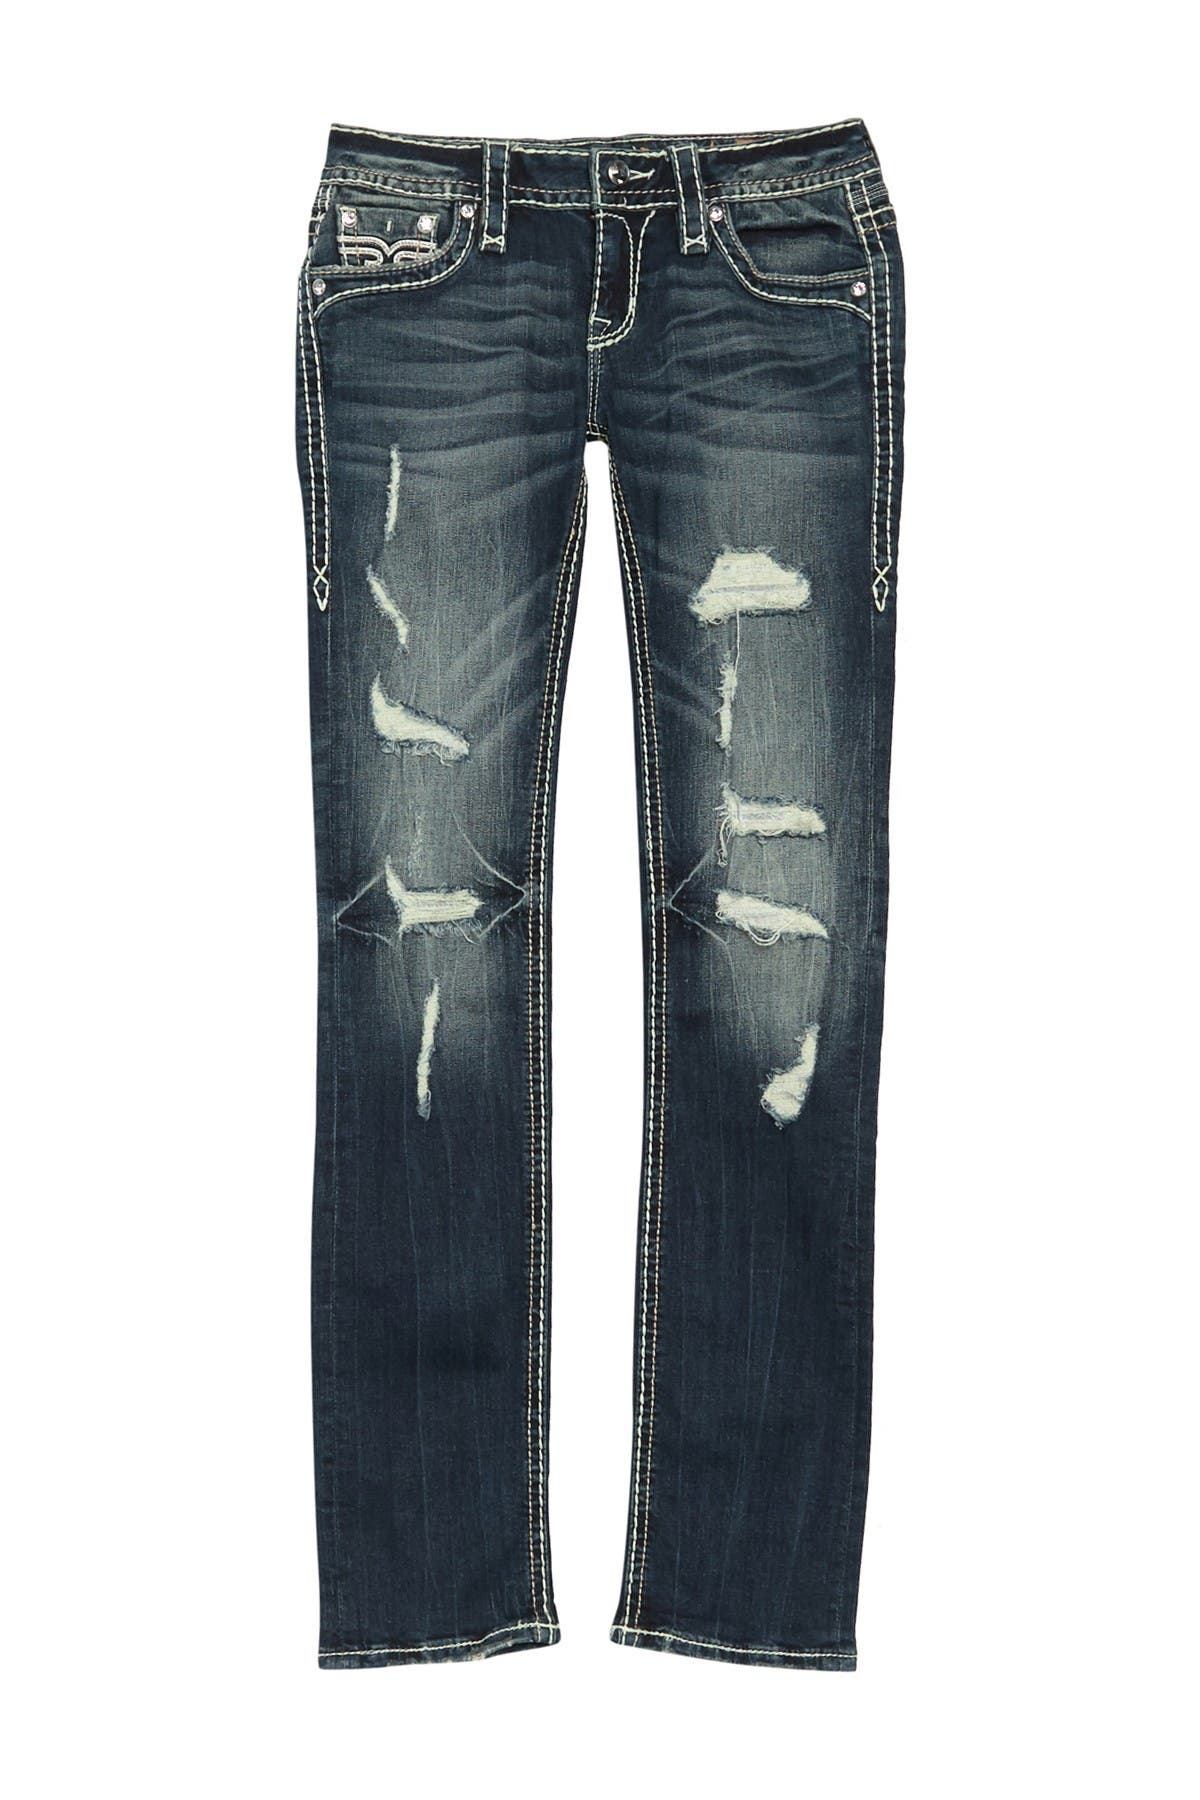 rock revival straight jeans